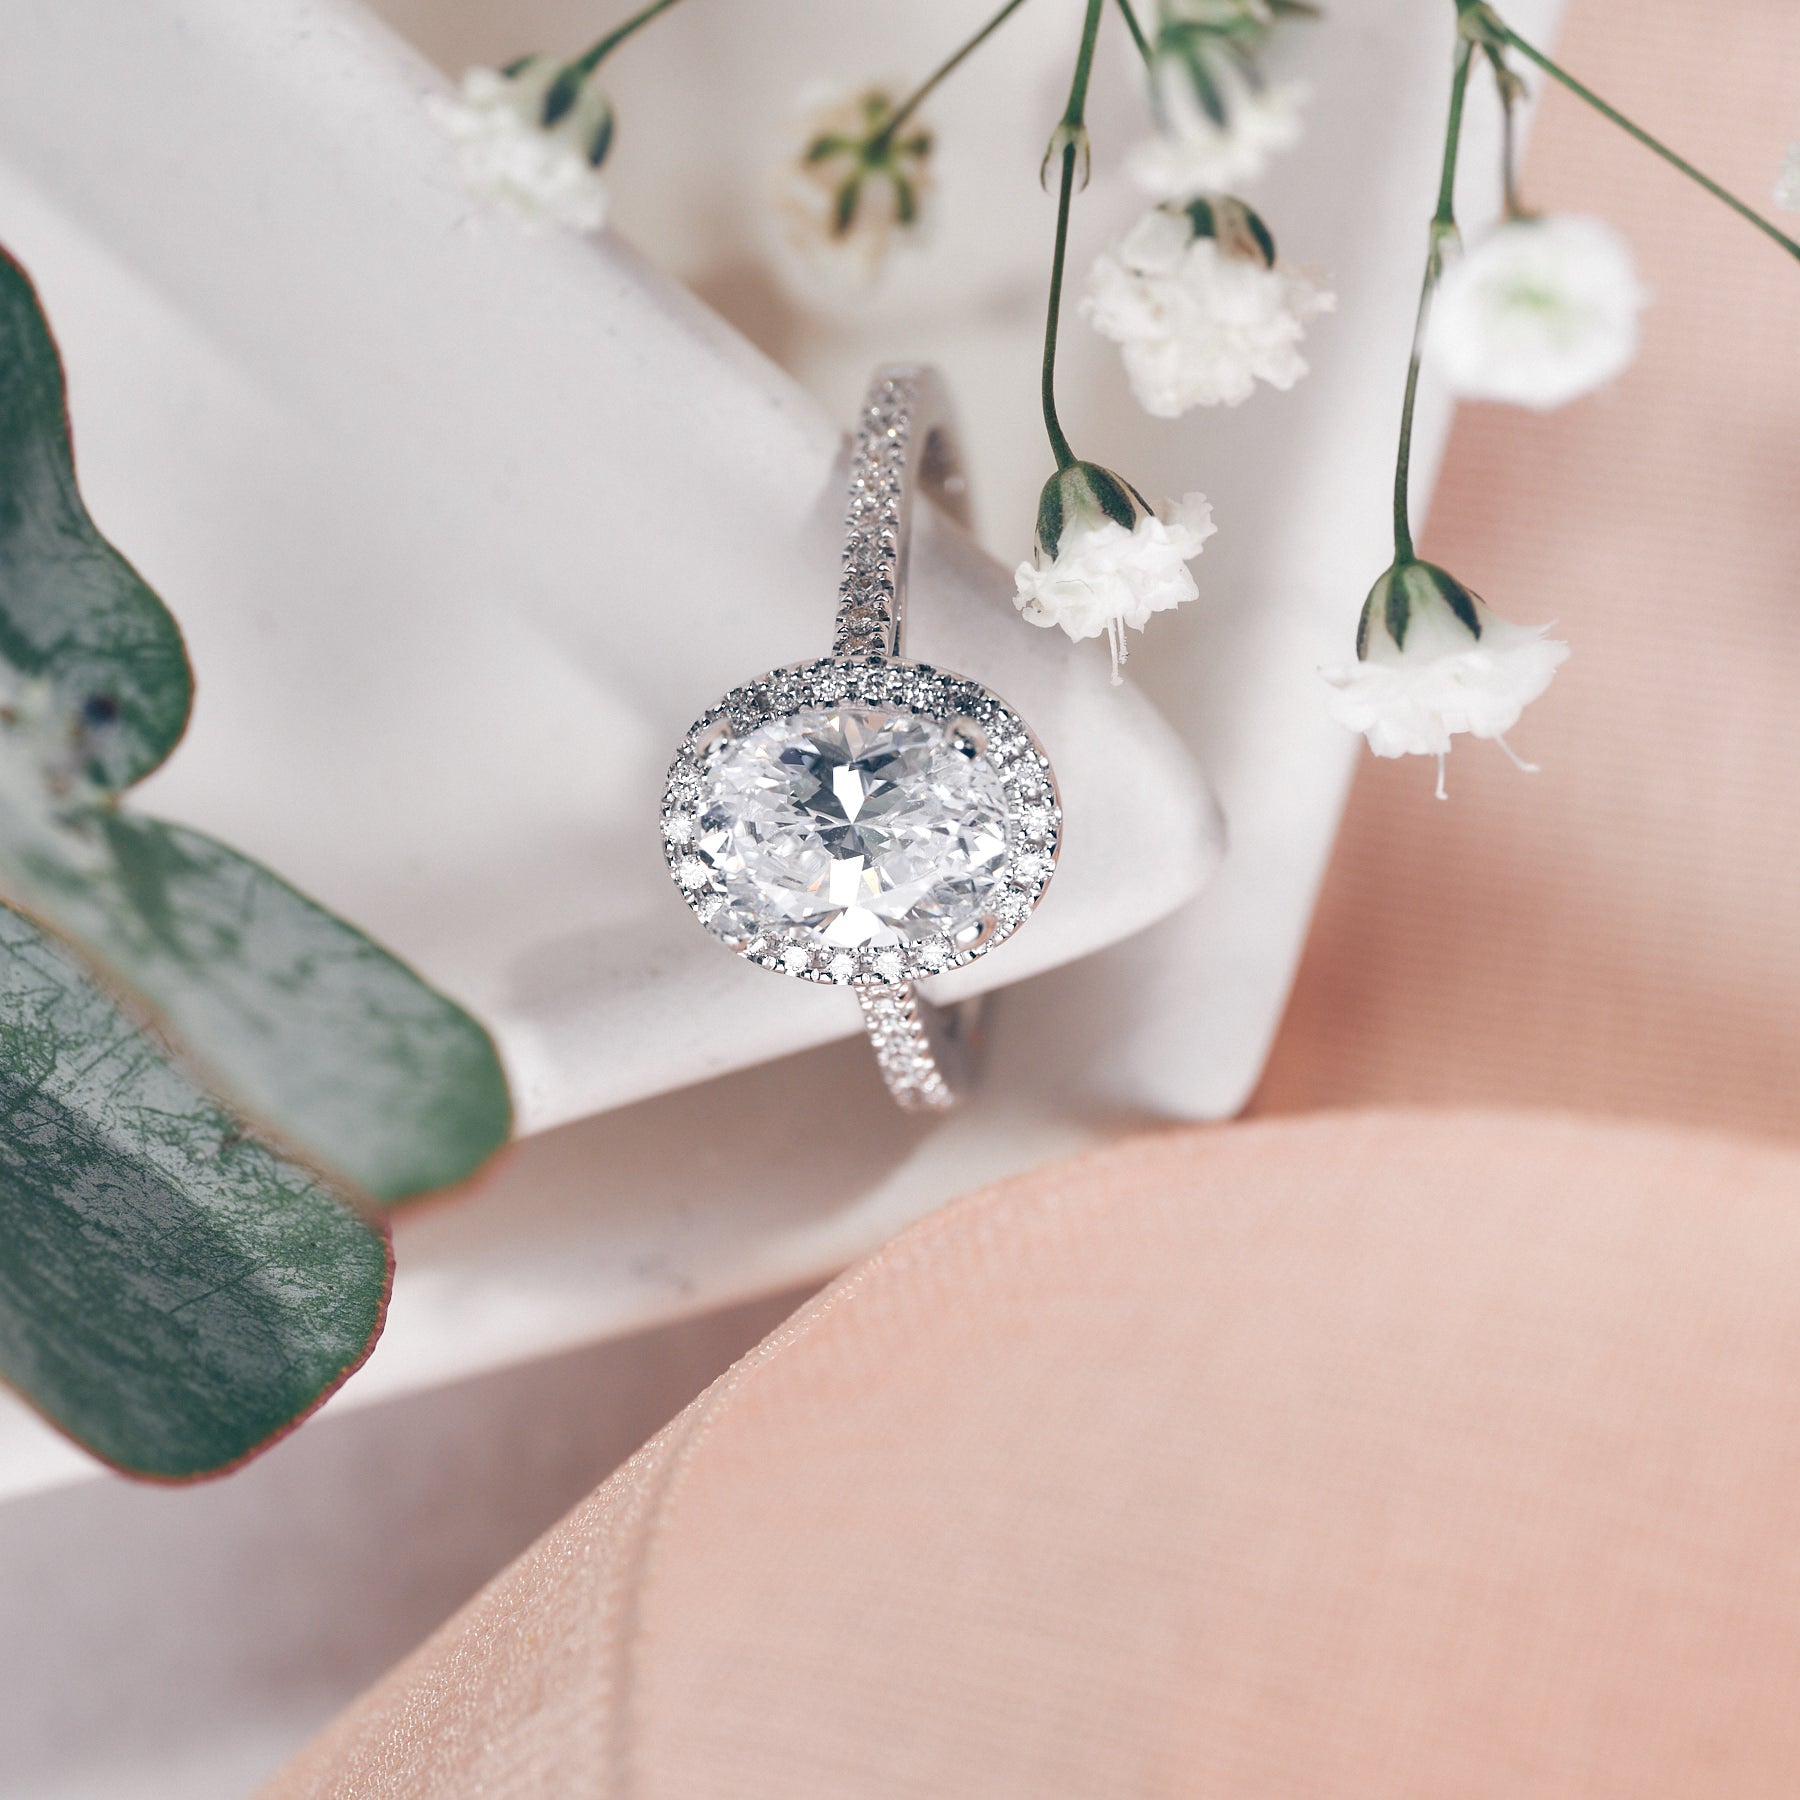 Diamond ring on display with delicate flowers